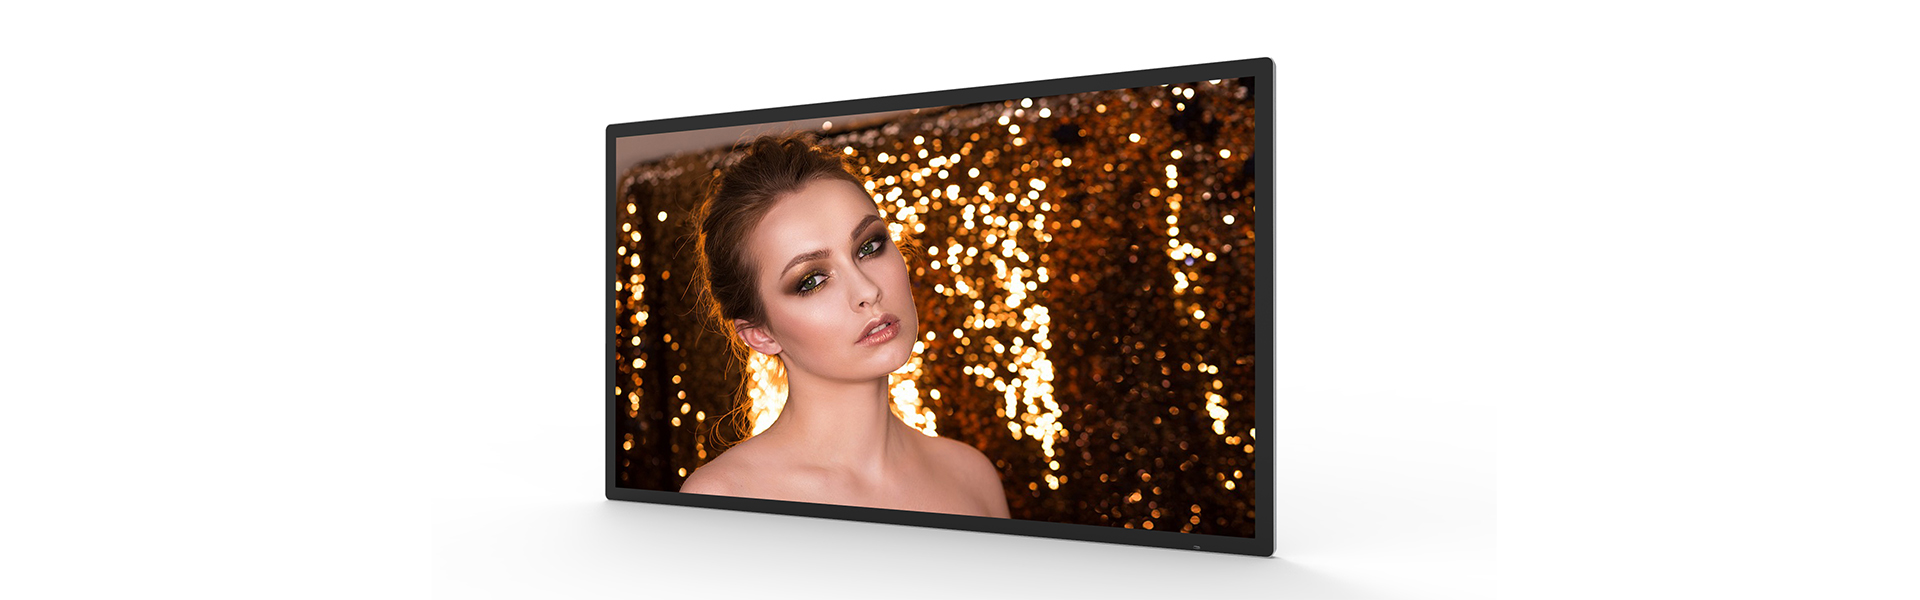 Touch Screen Digital Signage – No.521OC